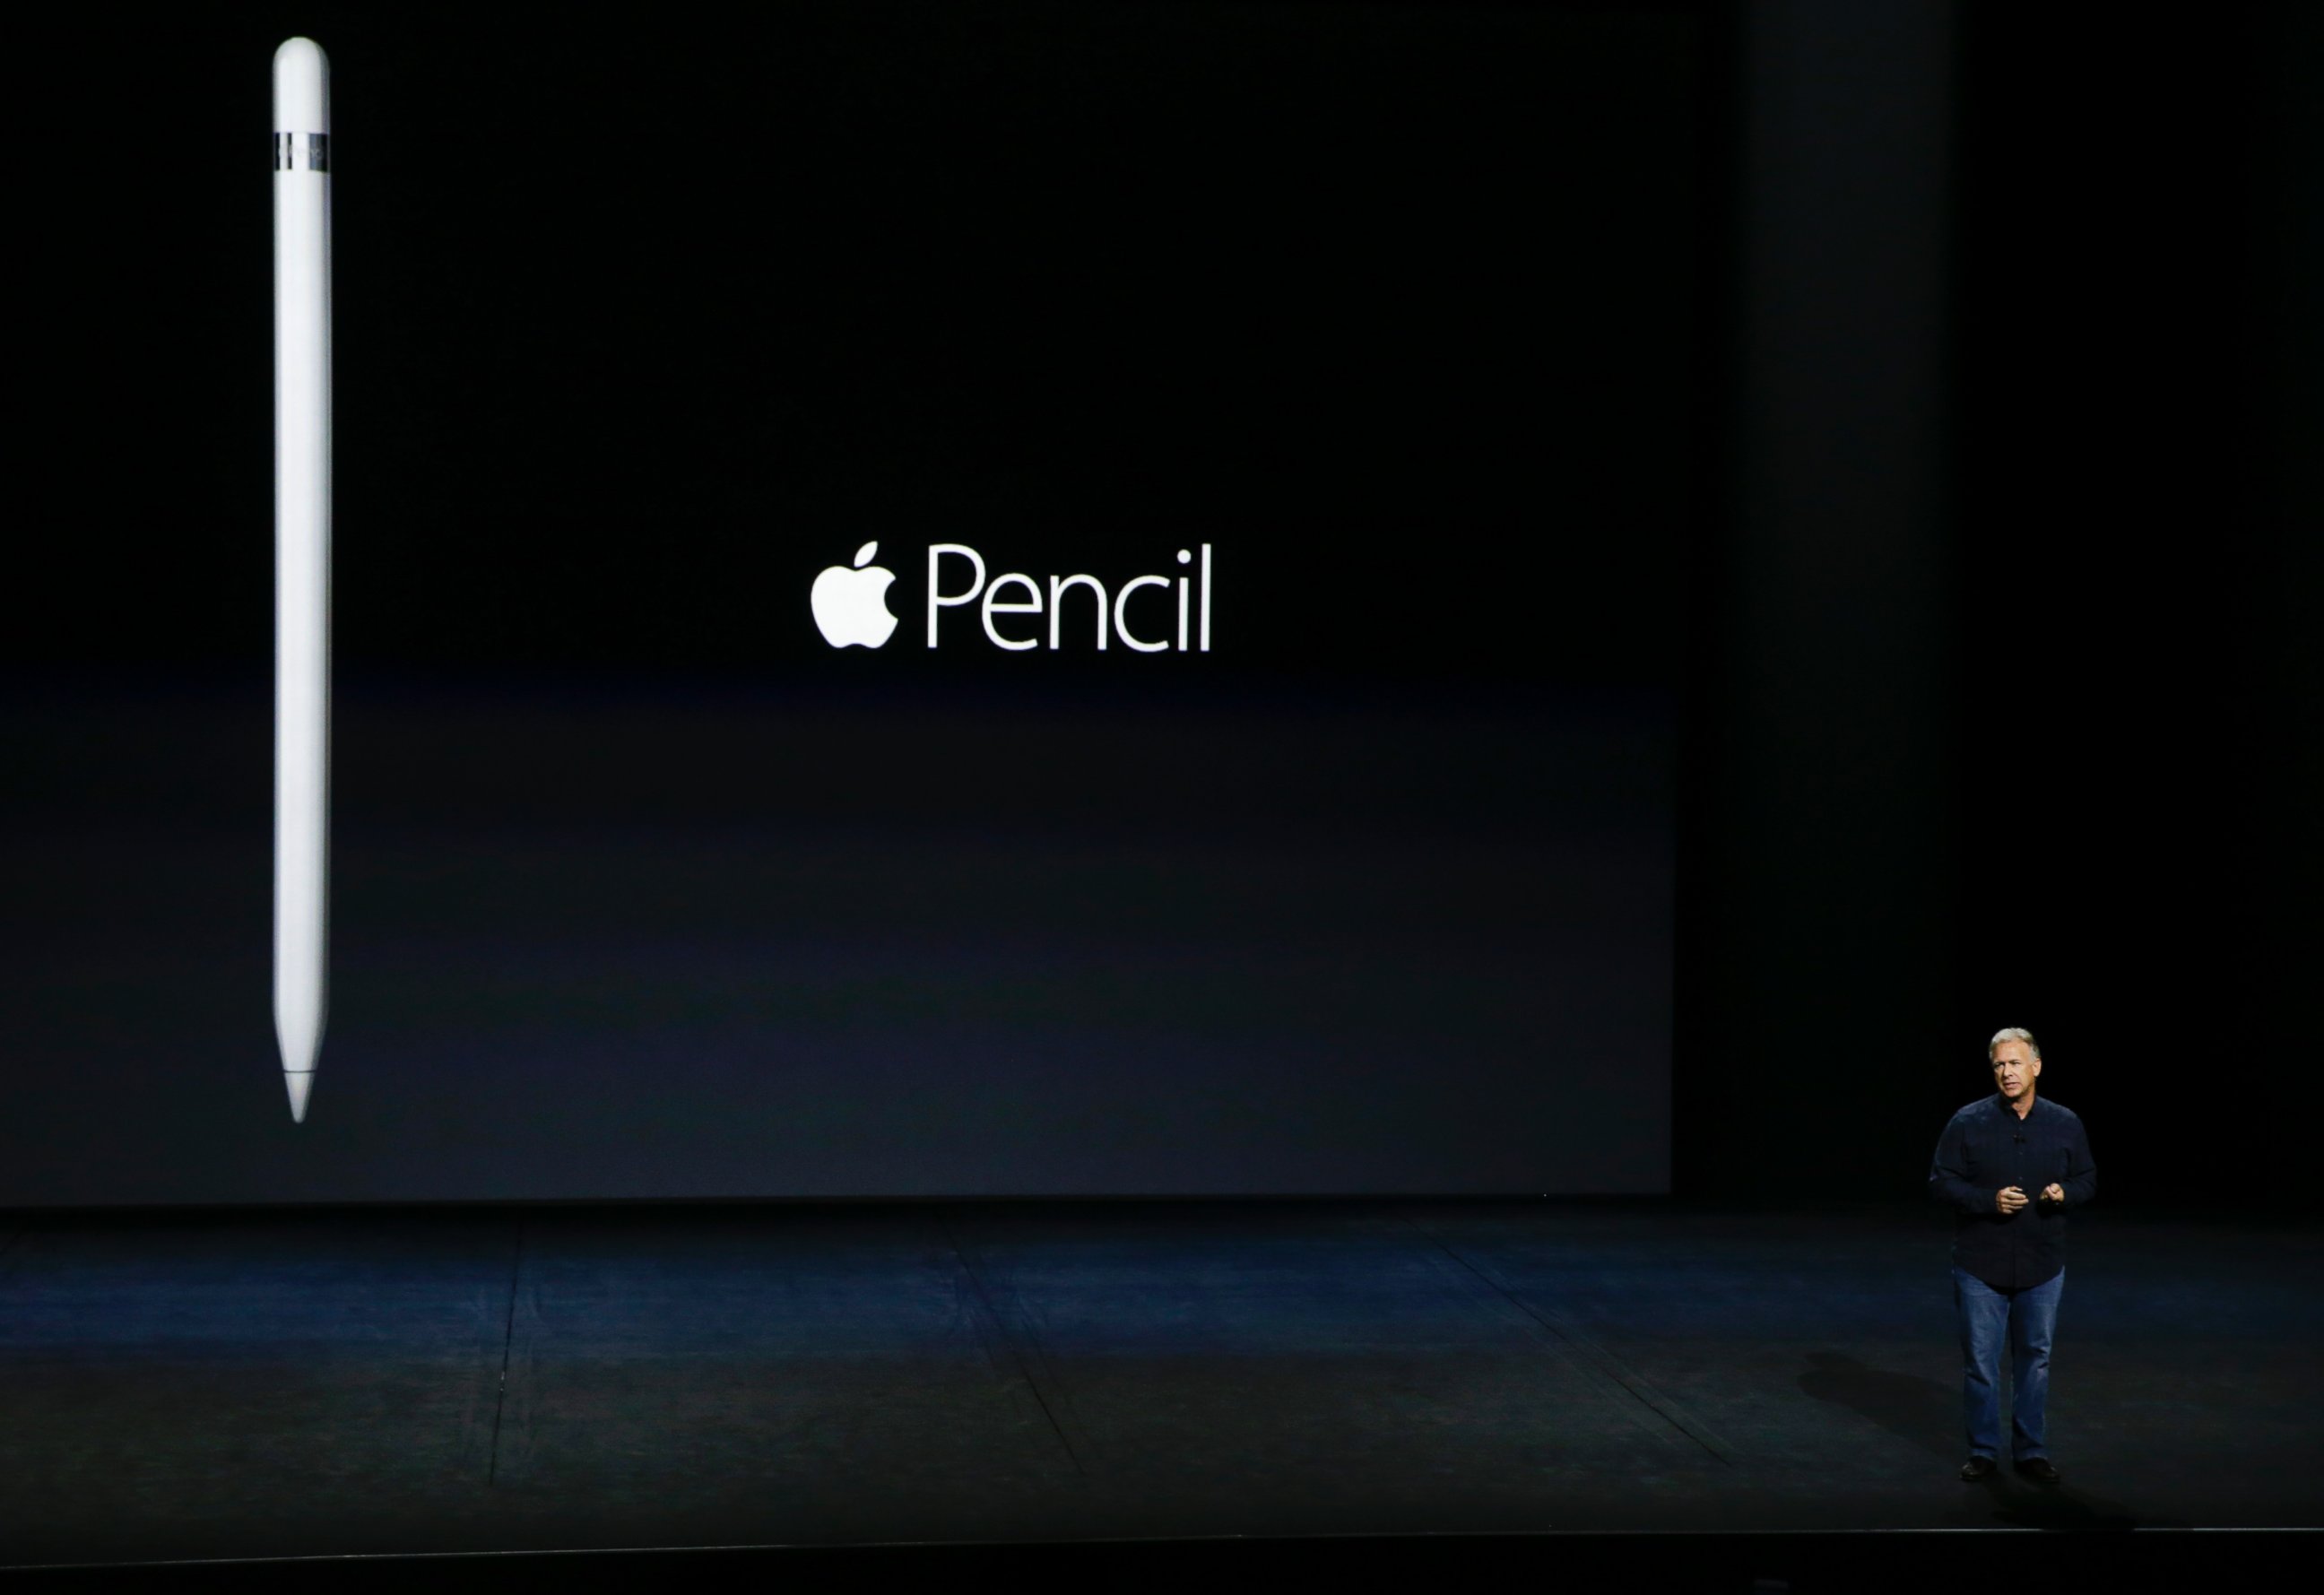 PHOTO: Phil Schiller, Apple's senior vice president of worldwide marketing, introduces the new Apple Pencil at the Apple event in the Bill Graham Civic Auditorium in San Francisco, on Sept. 9, 2015.